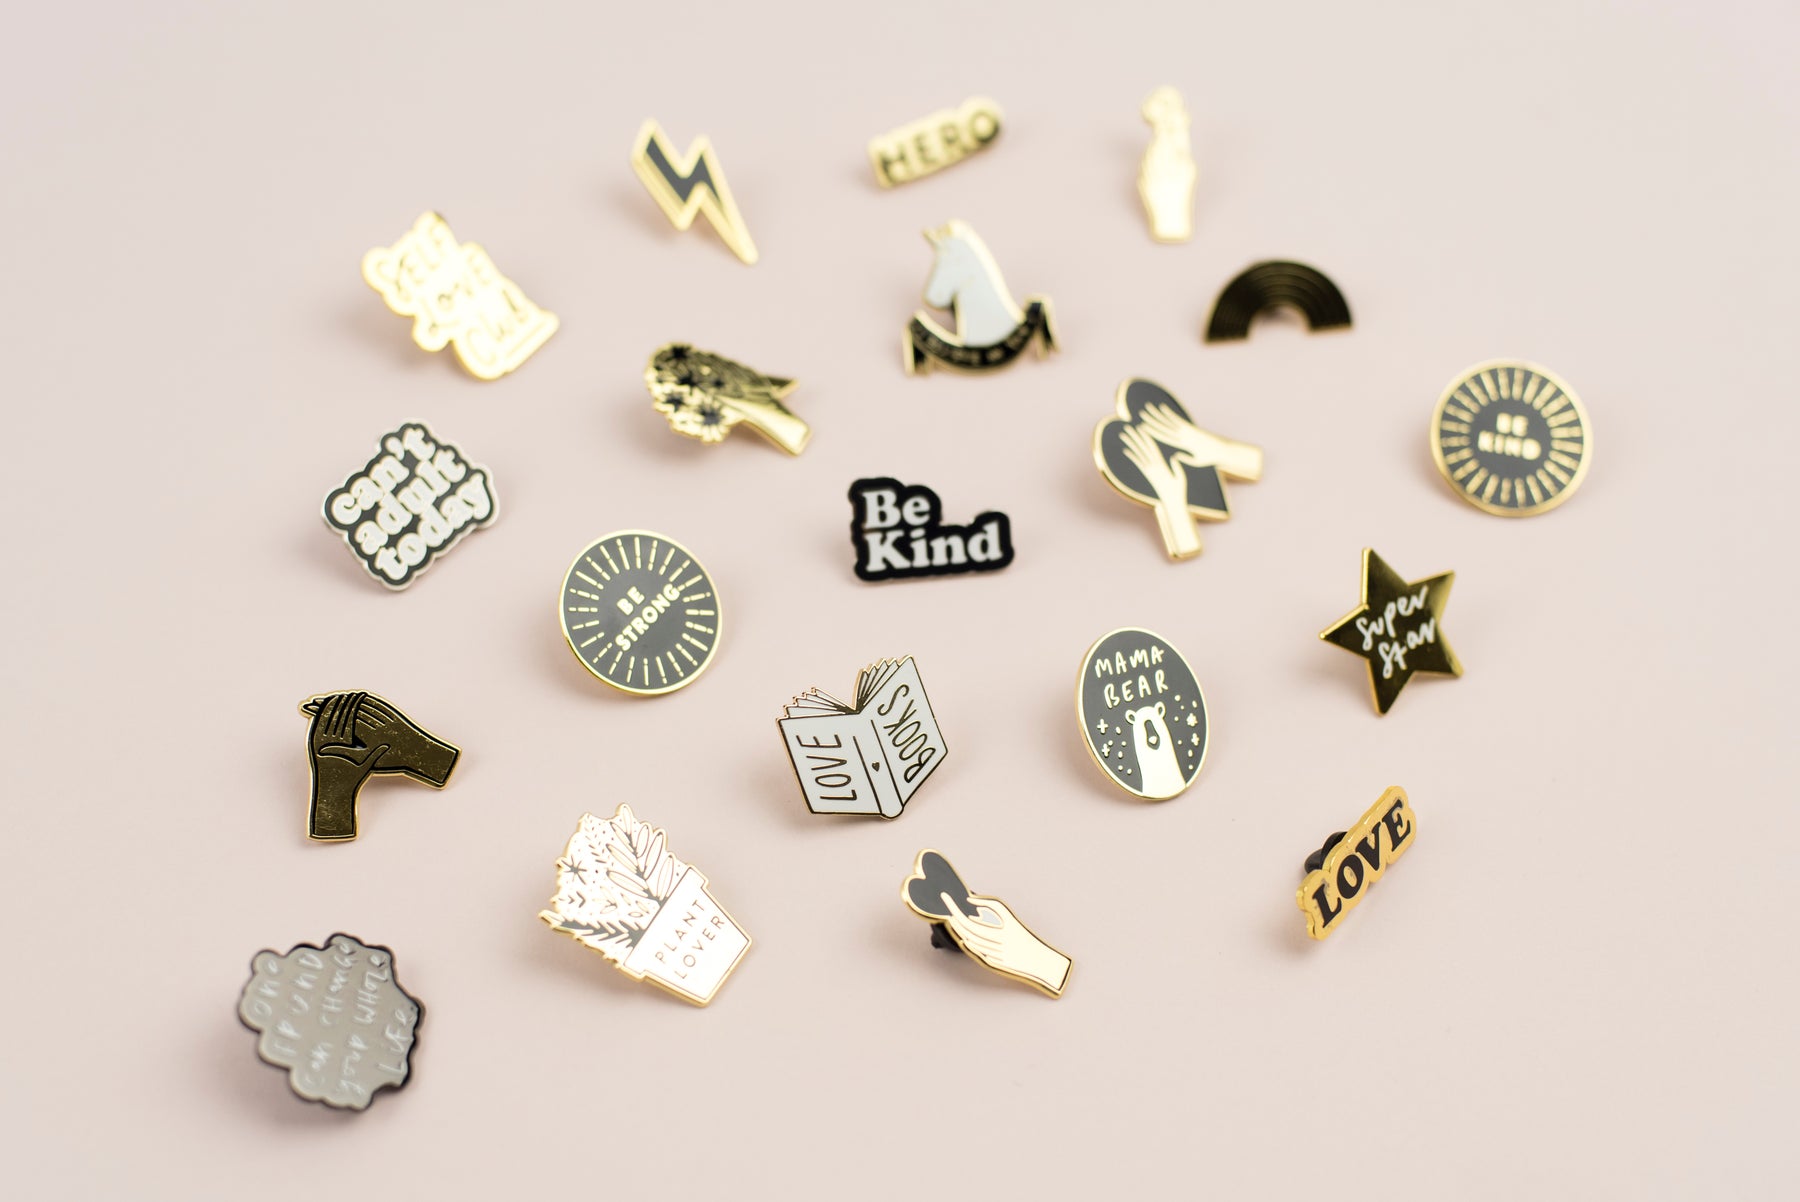 Top 3 Ways to Display Your Enamel Pins in 2021